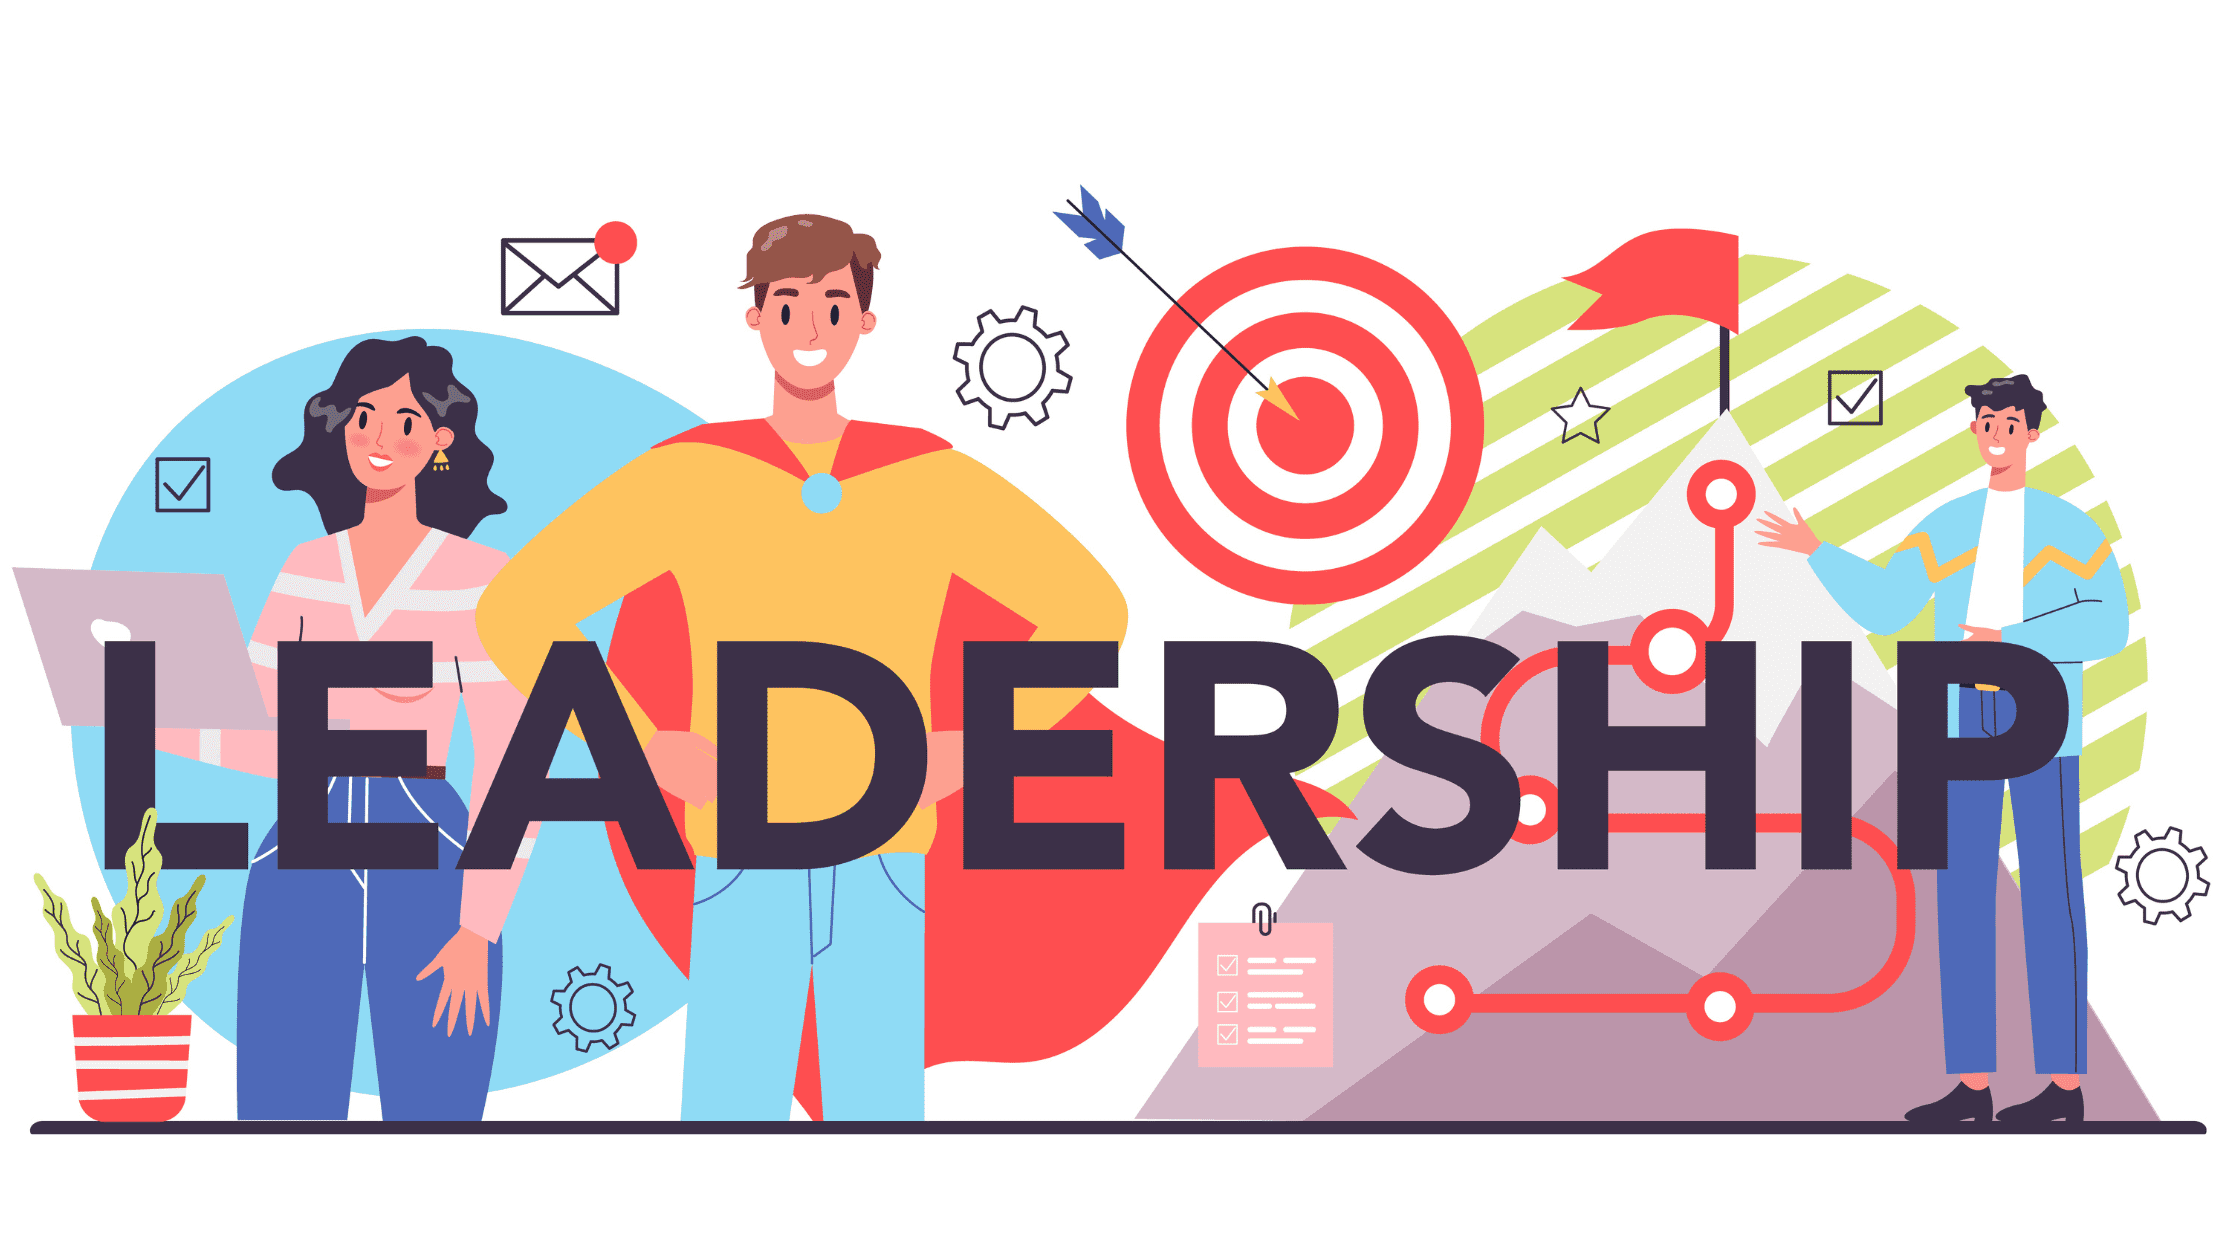 Amazon leadership principles interview -Crafting Your STAR Stories